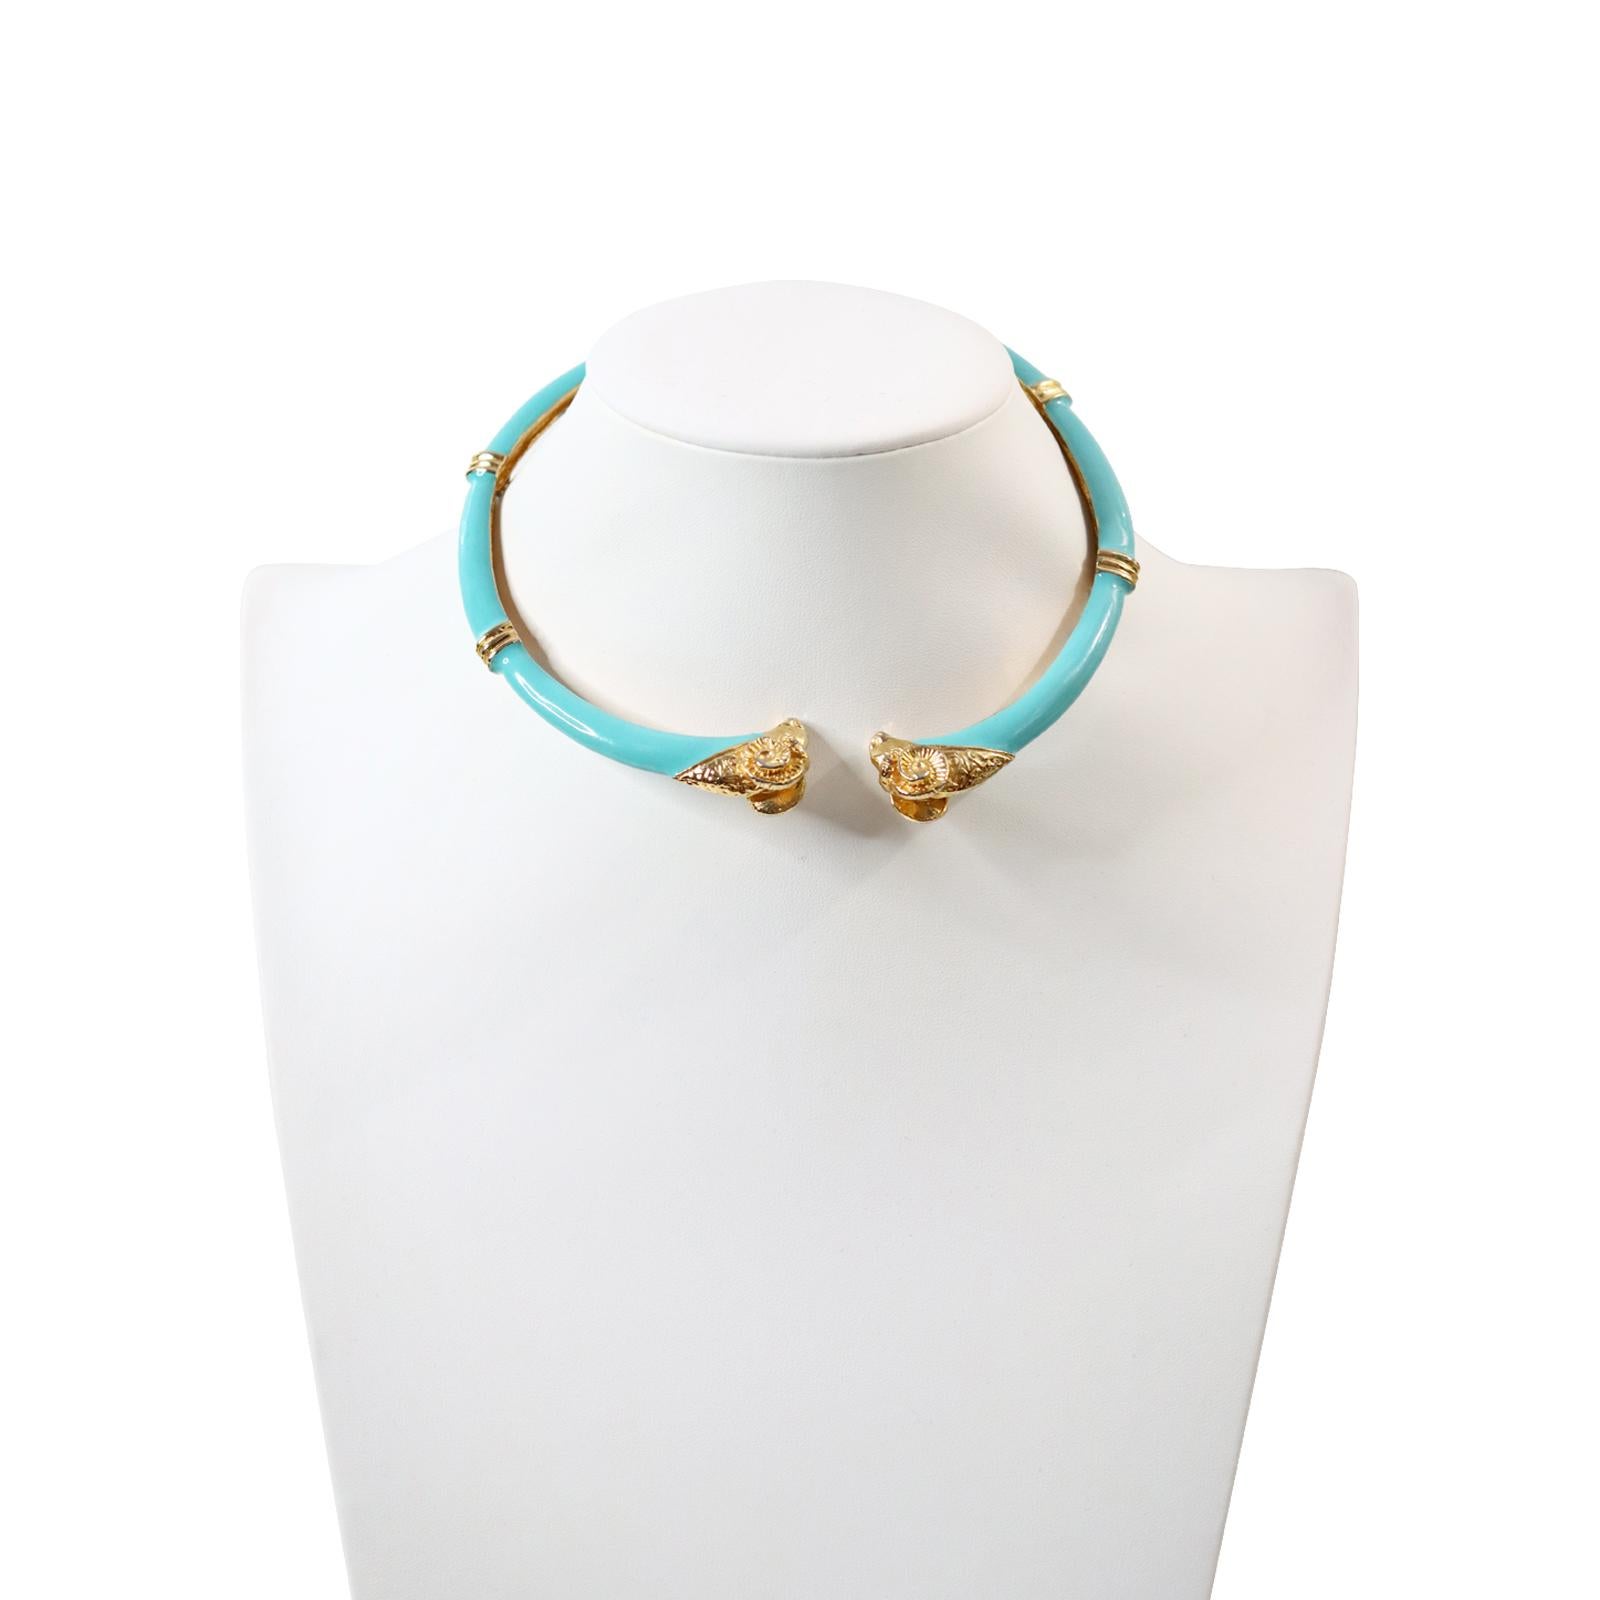 Women's or Men's Vintage Donald Stannard Rams Head Choker in Turquoise and Gold Circa 1980s